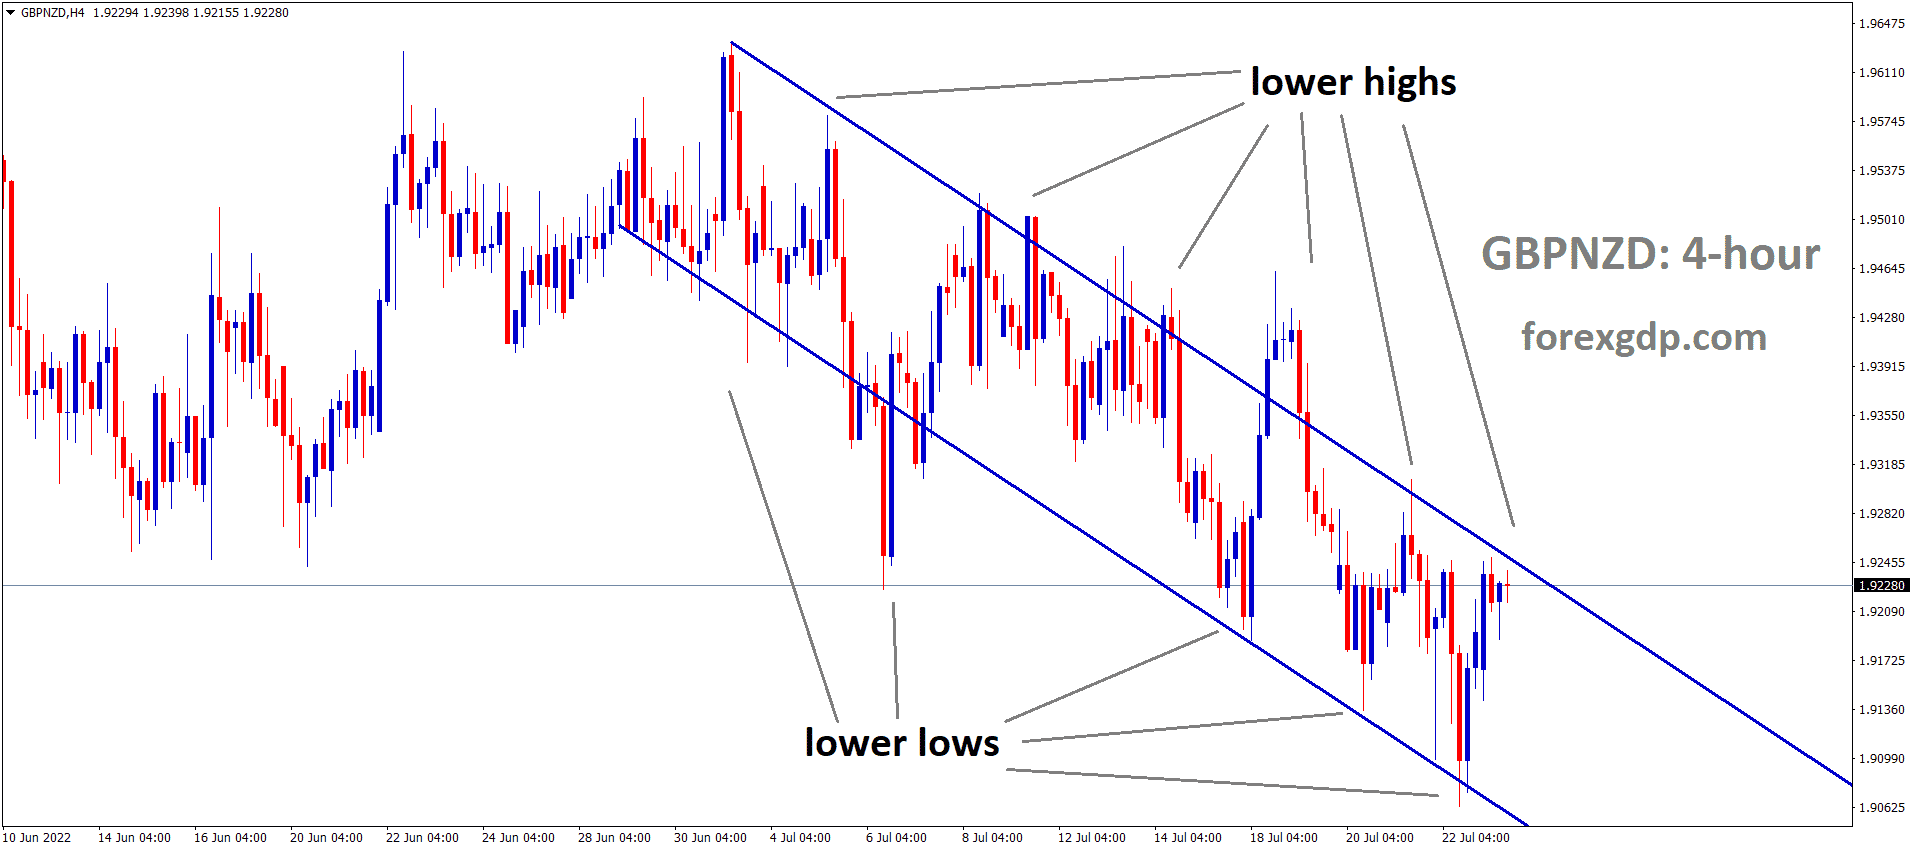 GBPNZD is moving in the Descending channel and the Market has reached the Lower high area of the channel.